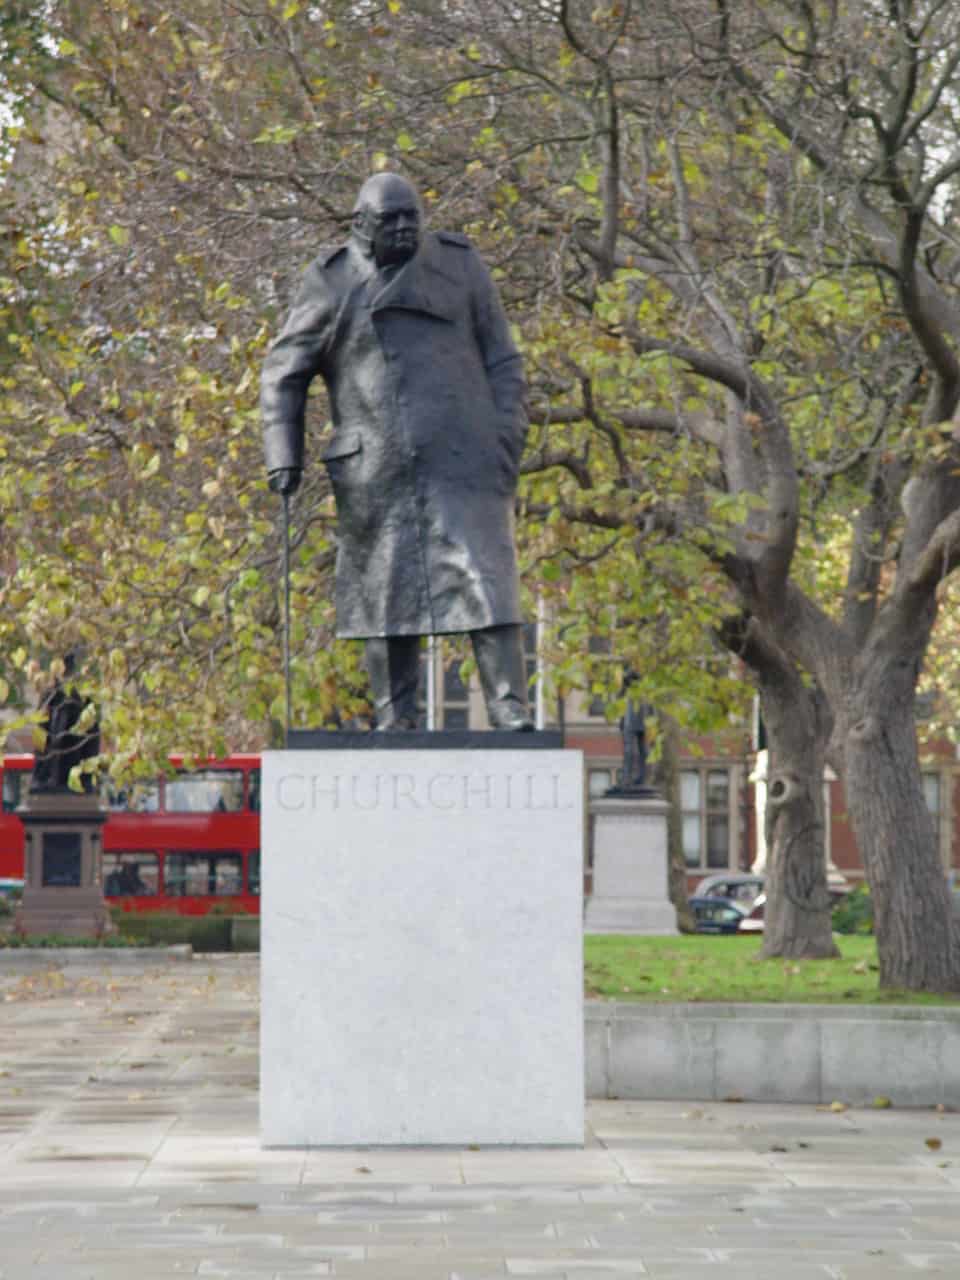 Sir Winston Churchill statue in Westminster, London, England